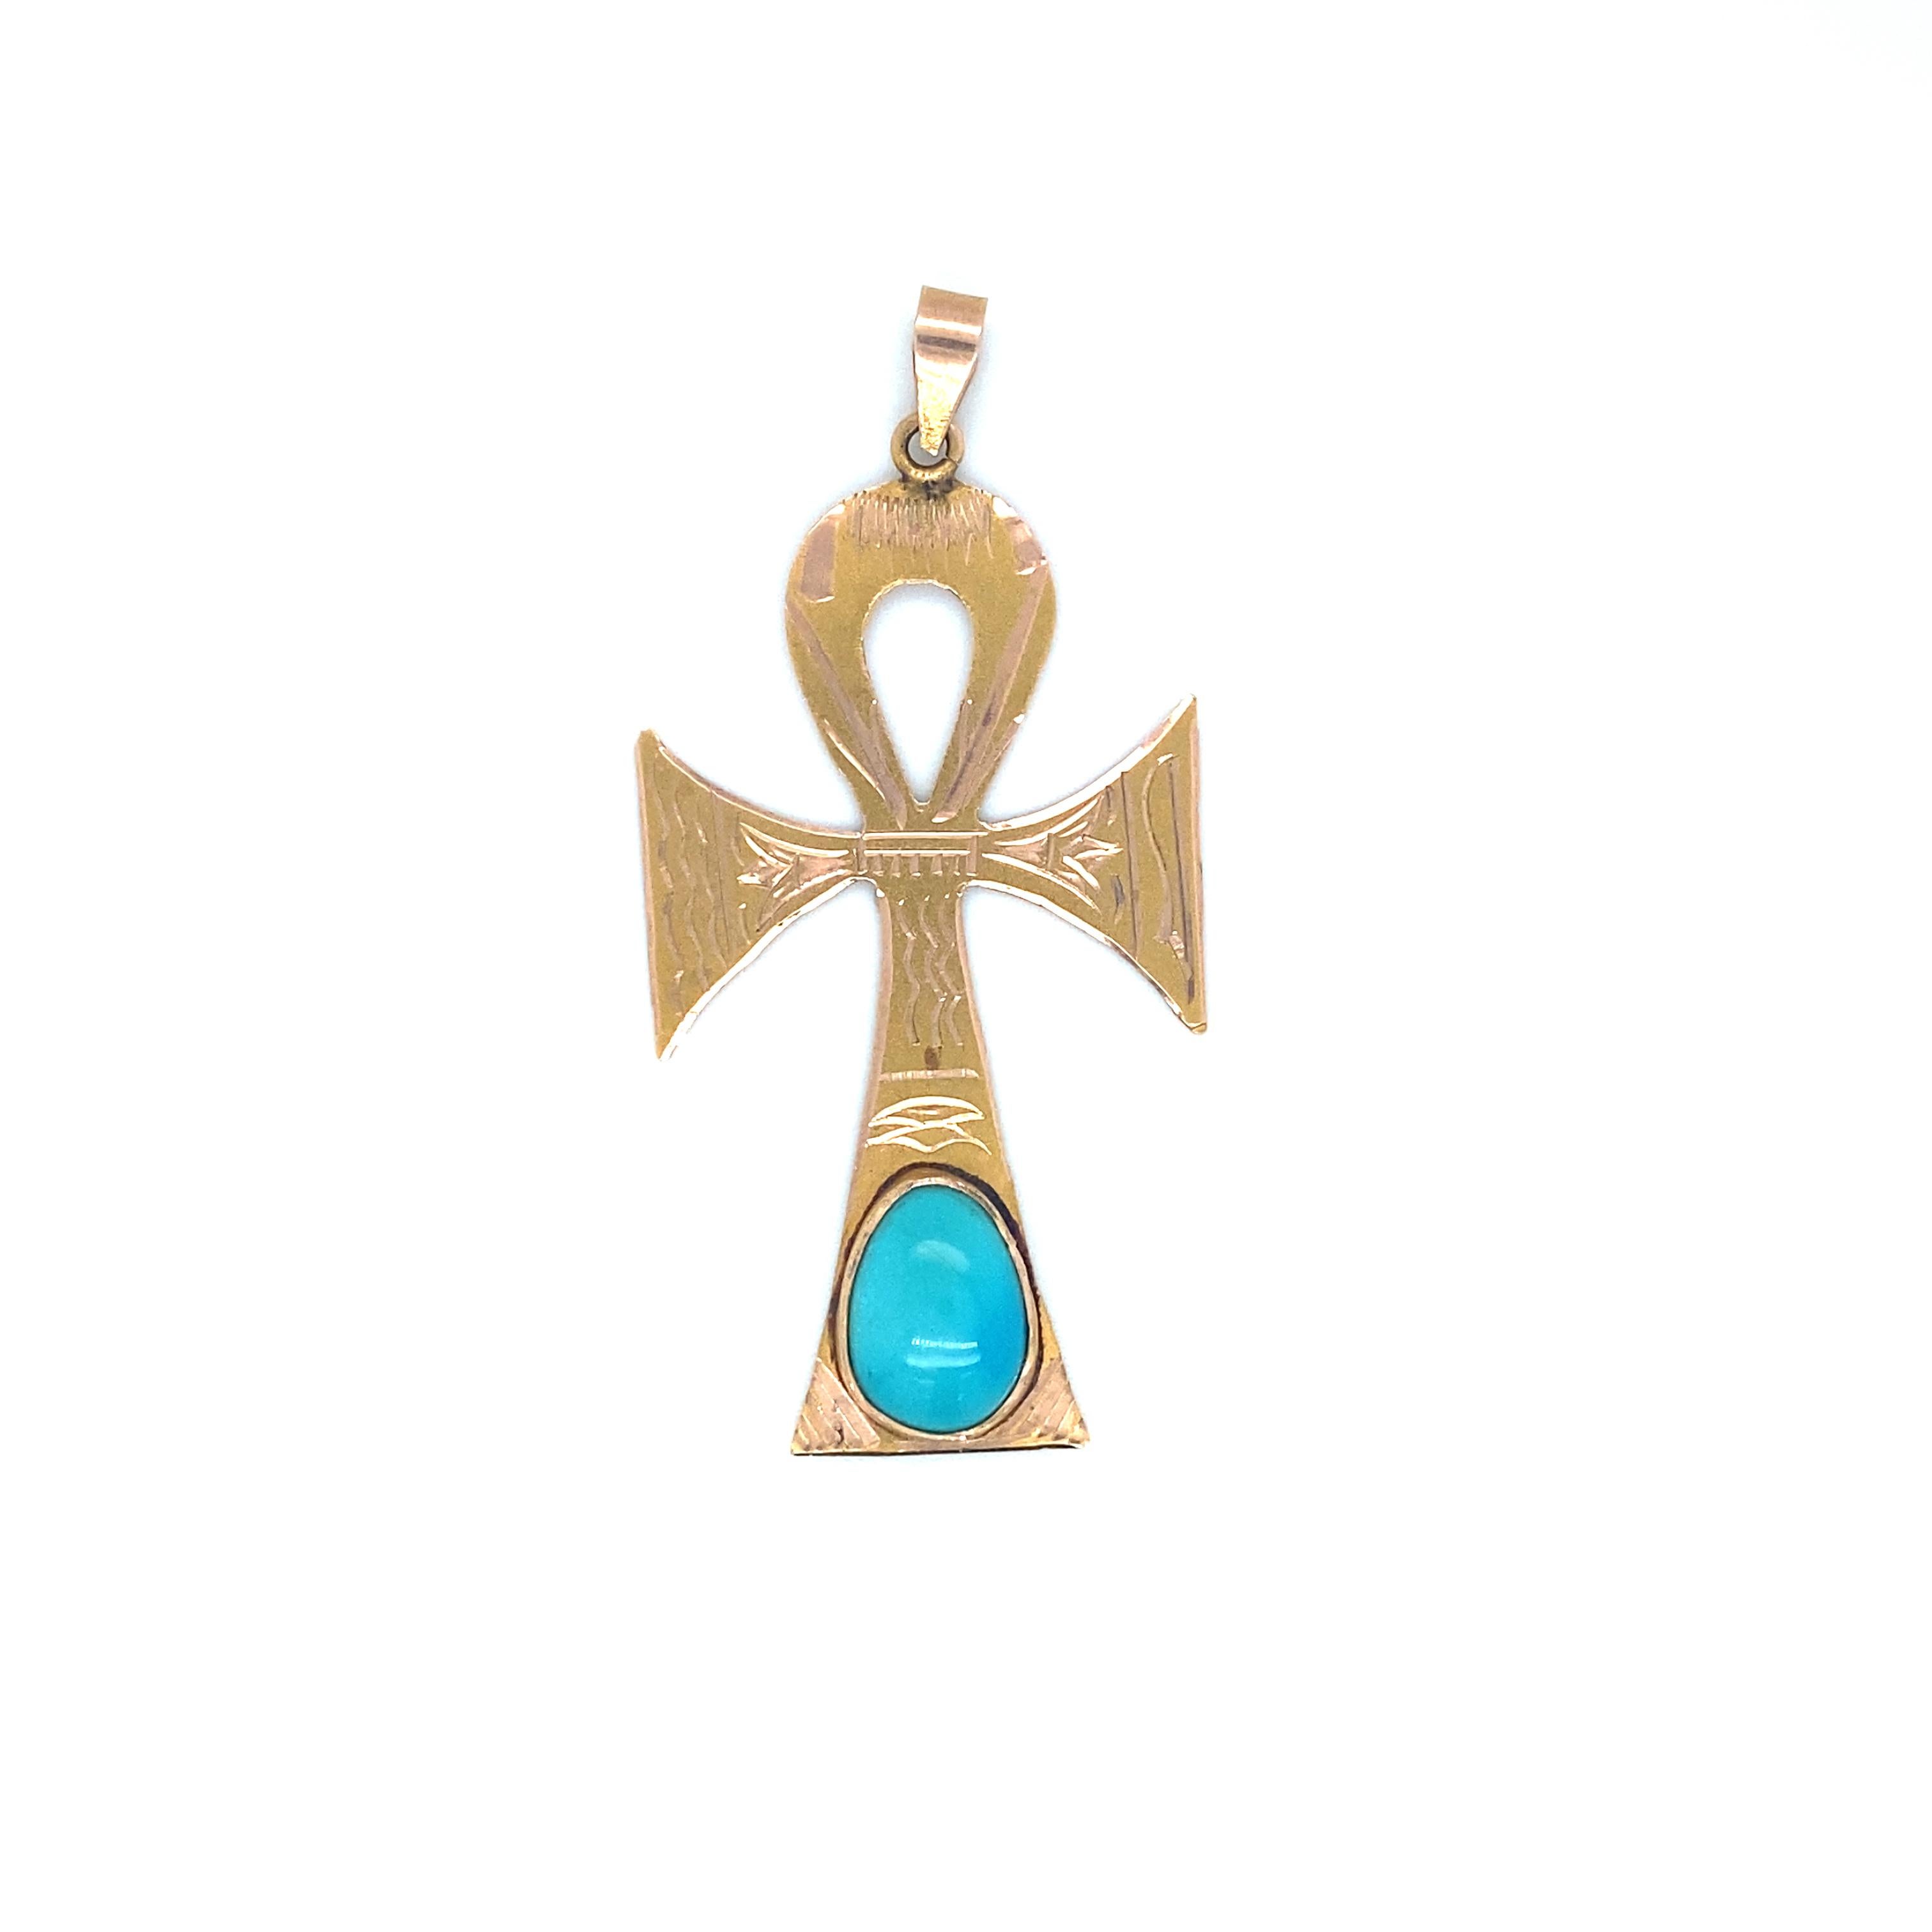 Item Details: This vintage pendant in the shape of an ancient Egyptian ankh symbol has a vibrant blue pear-shaped turquoise. It bears Egyptian gold hallmarks. This is a high quality 1970s pendant that is perfect for adding something groovy to any